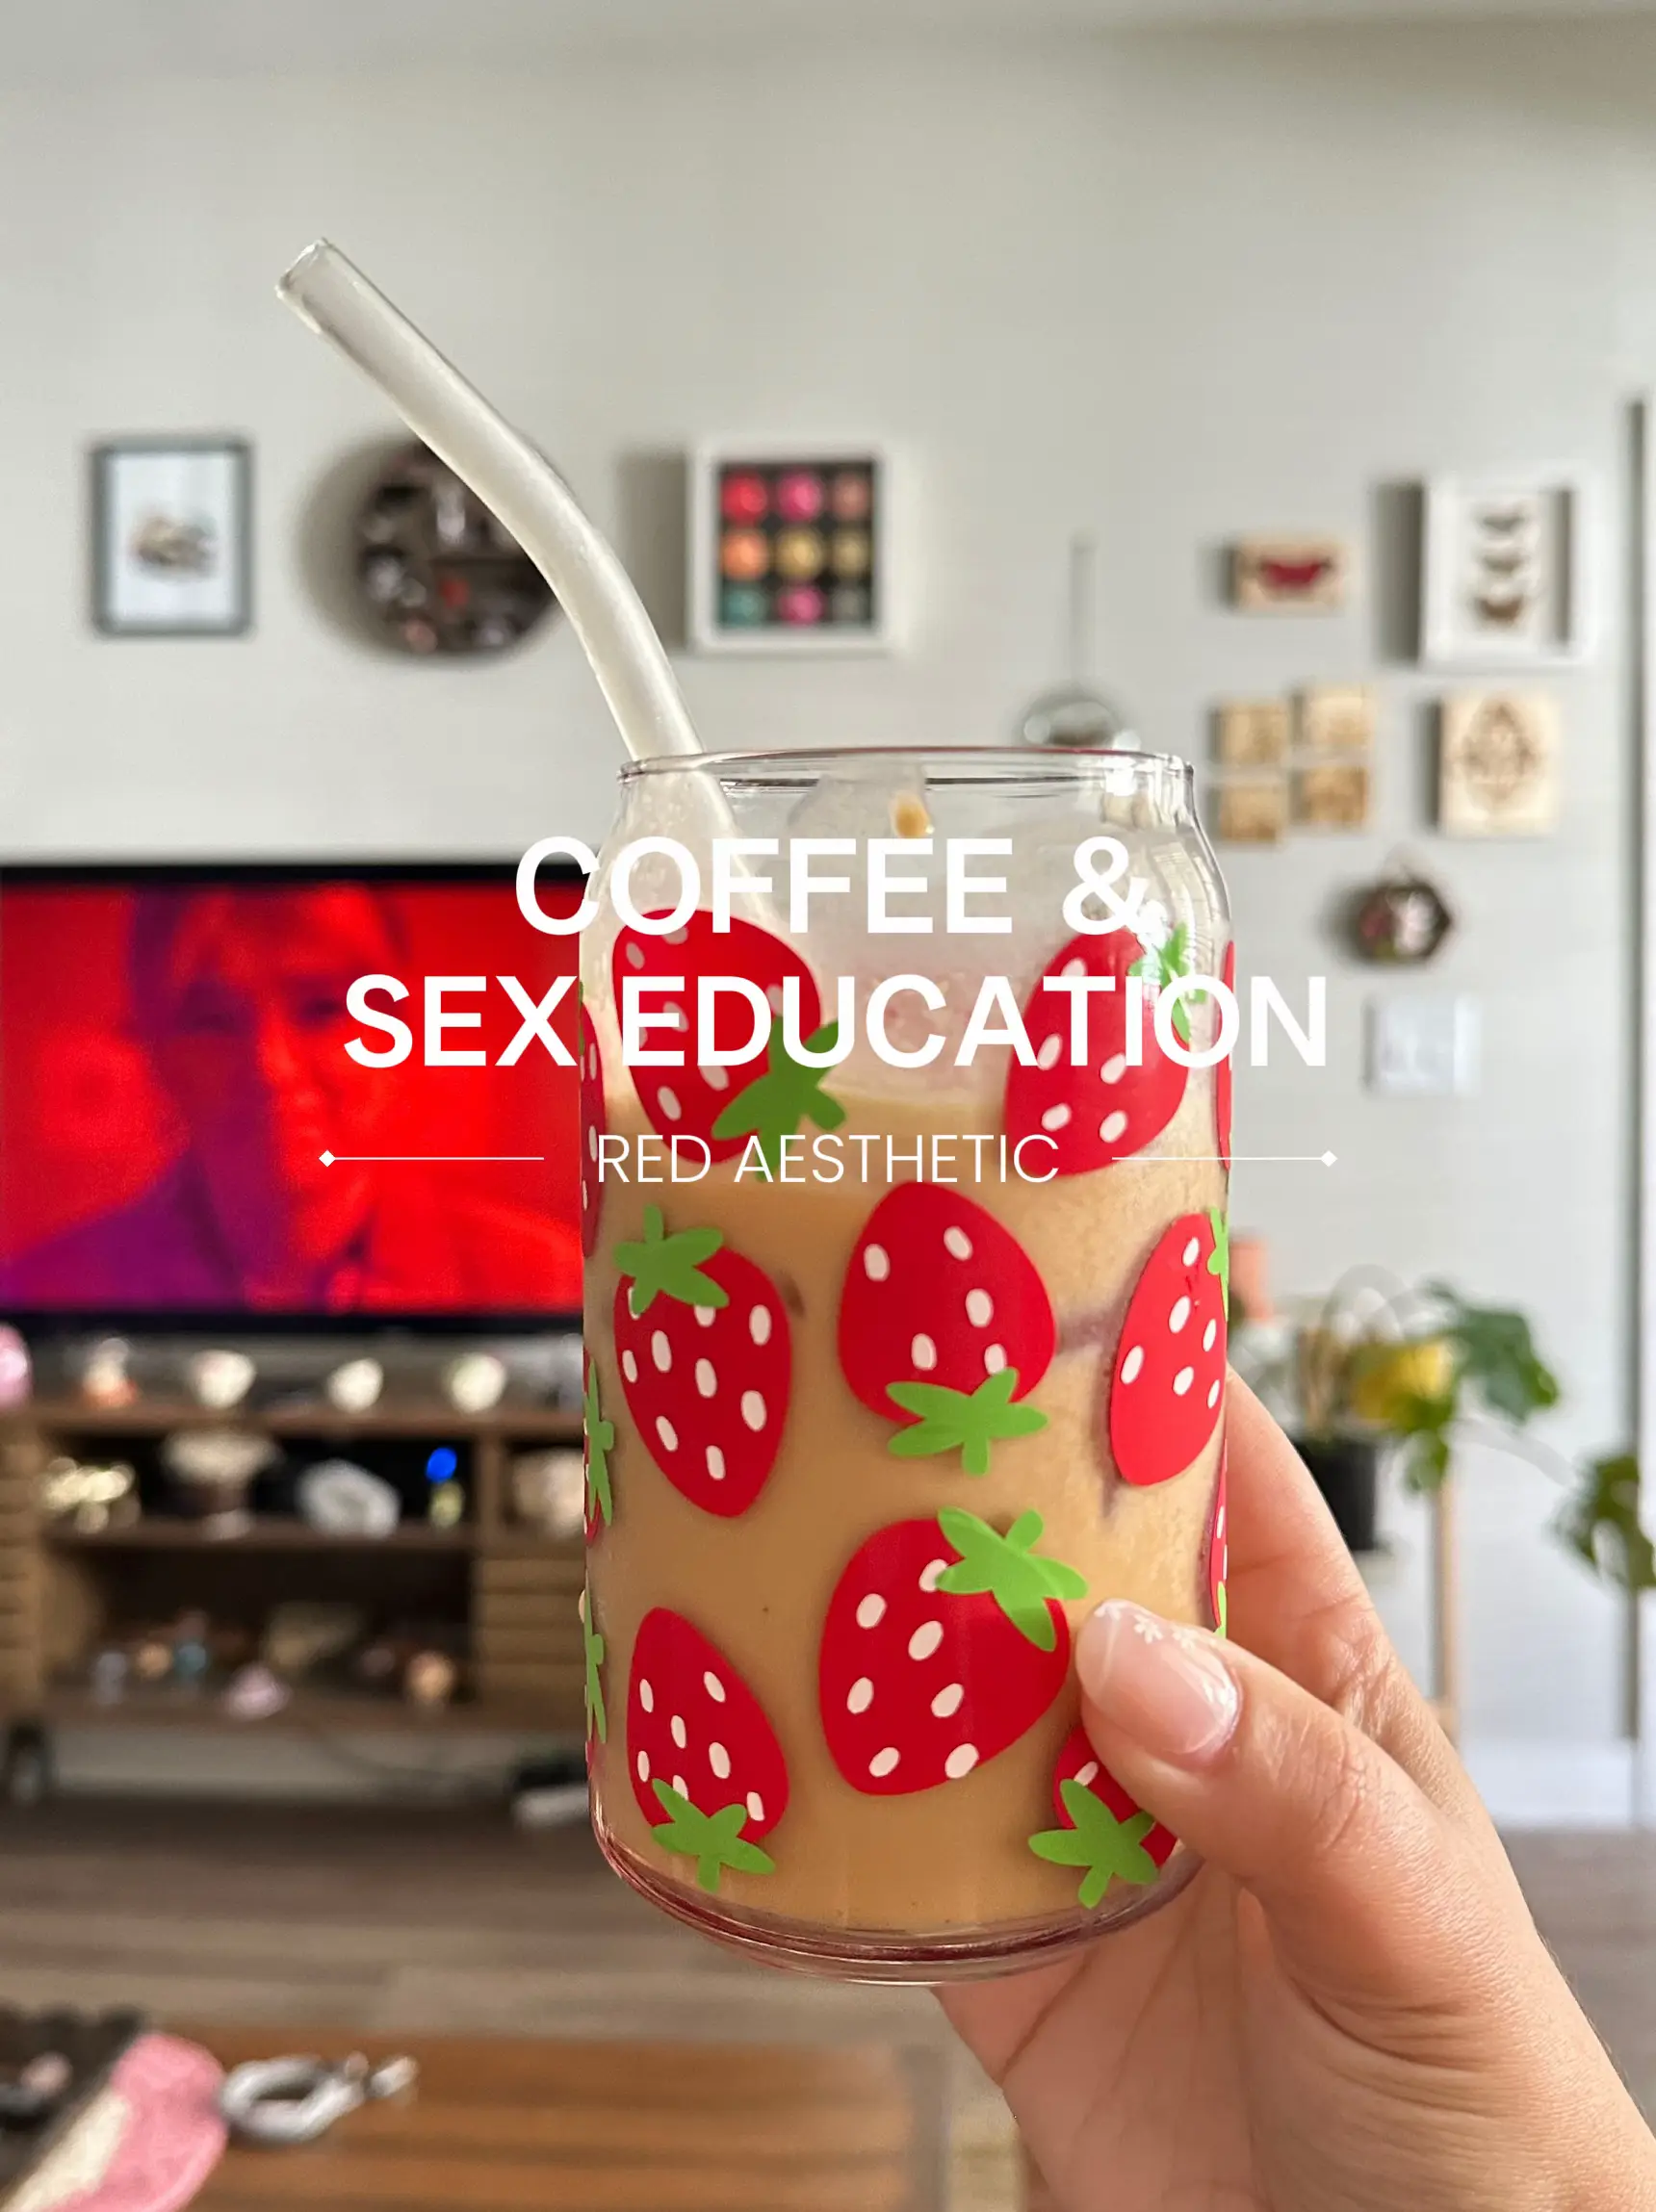 COFFEE & S*X EDUCATION ☕️'s images